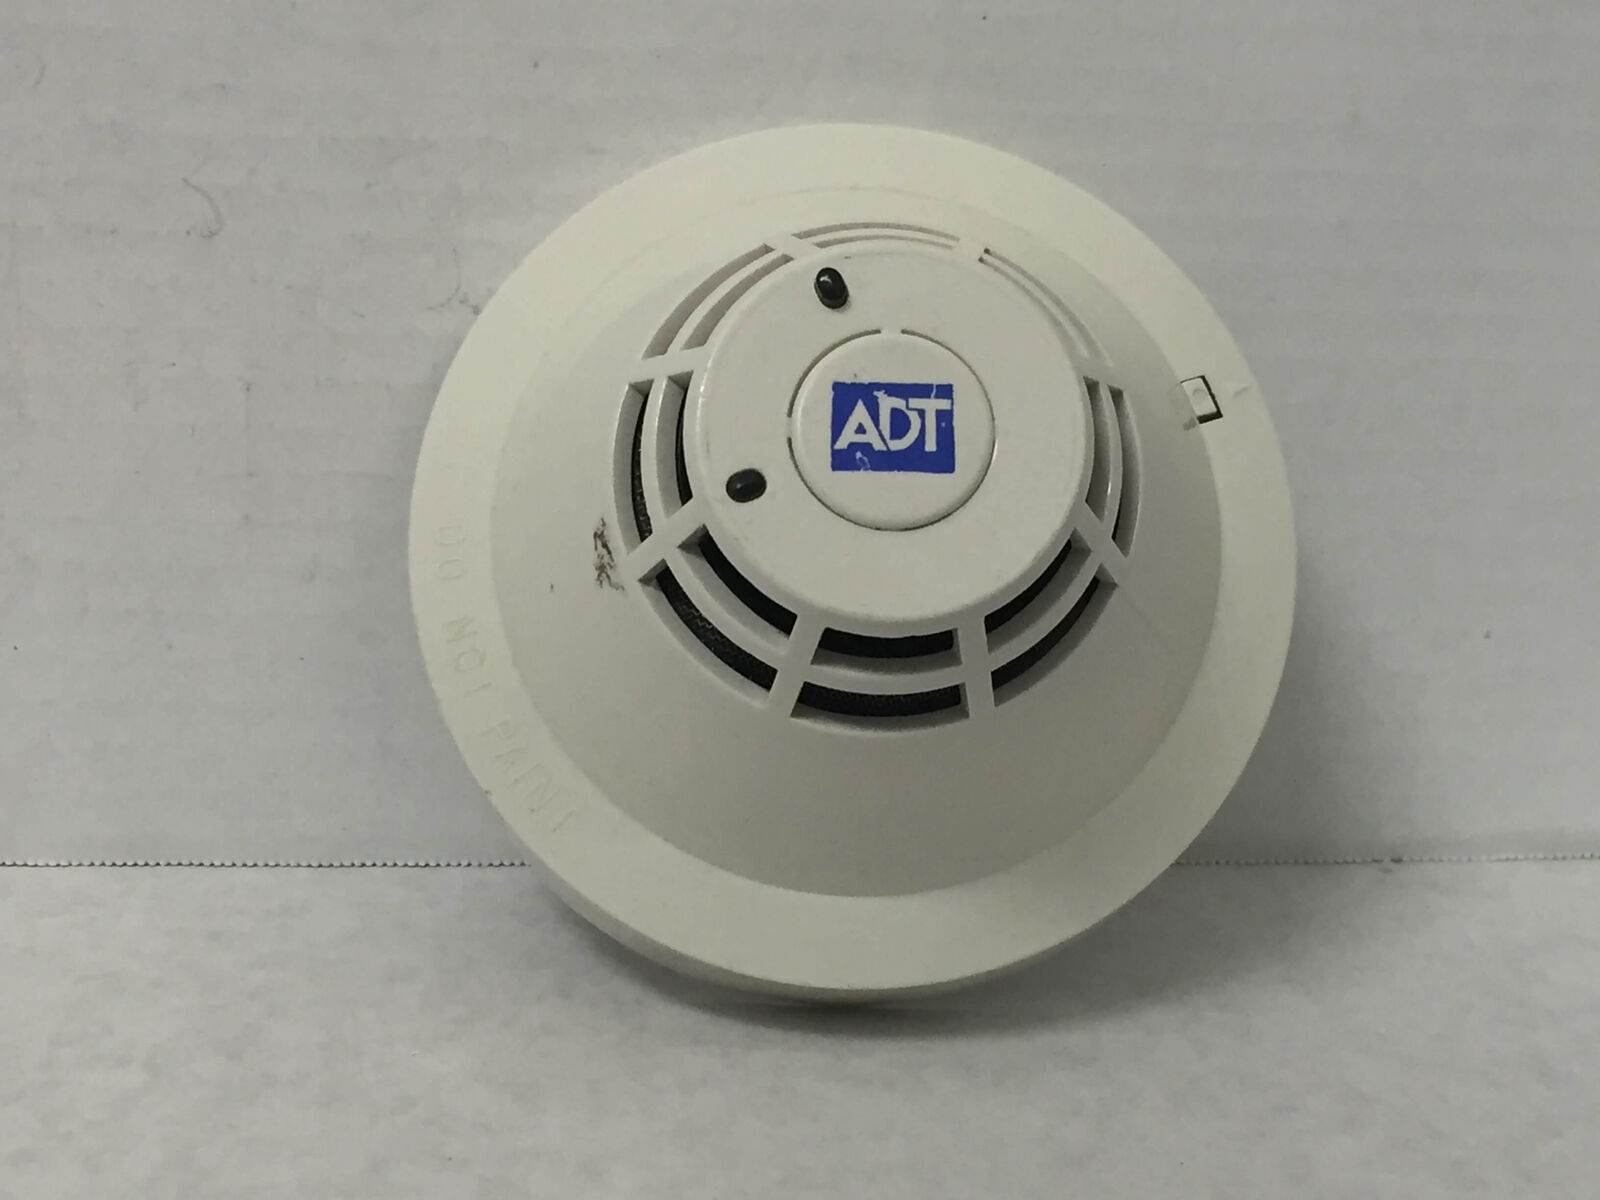 How To Replace The Battery In An ADT Smoke Detector